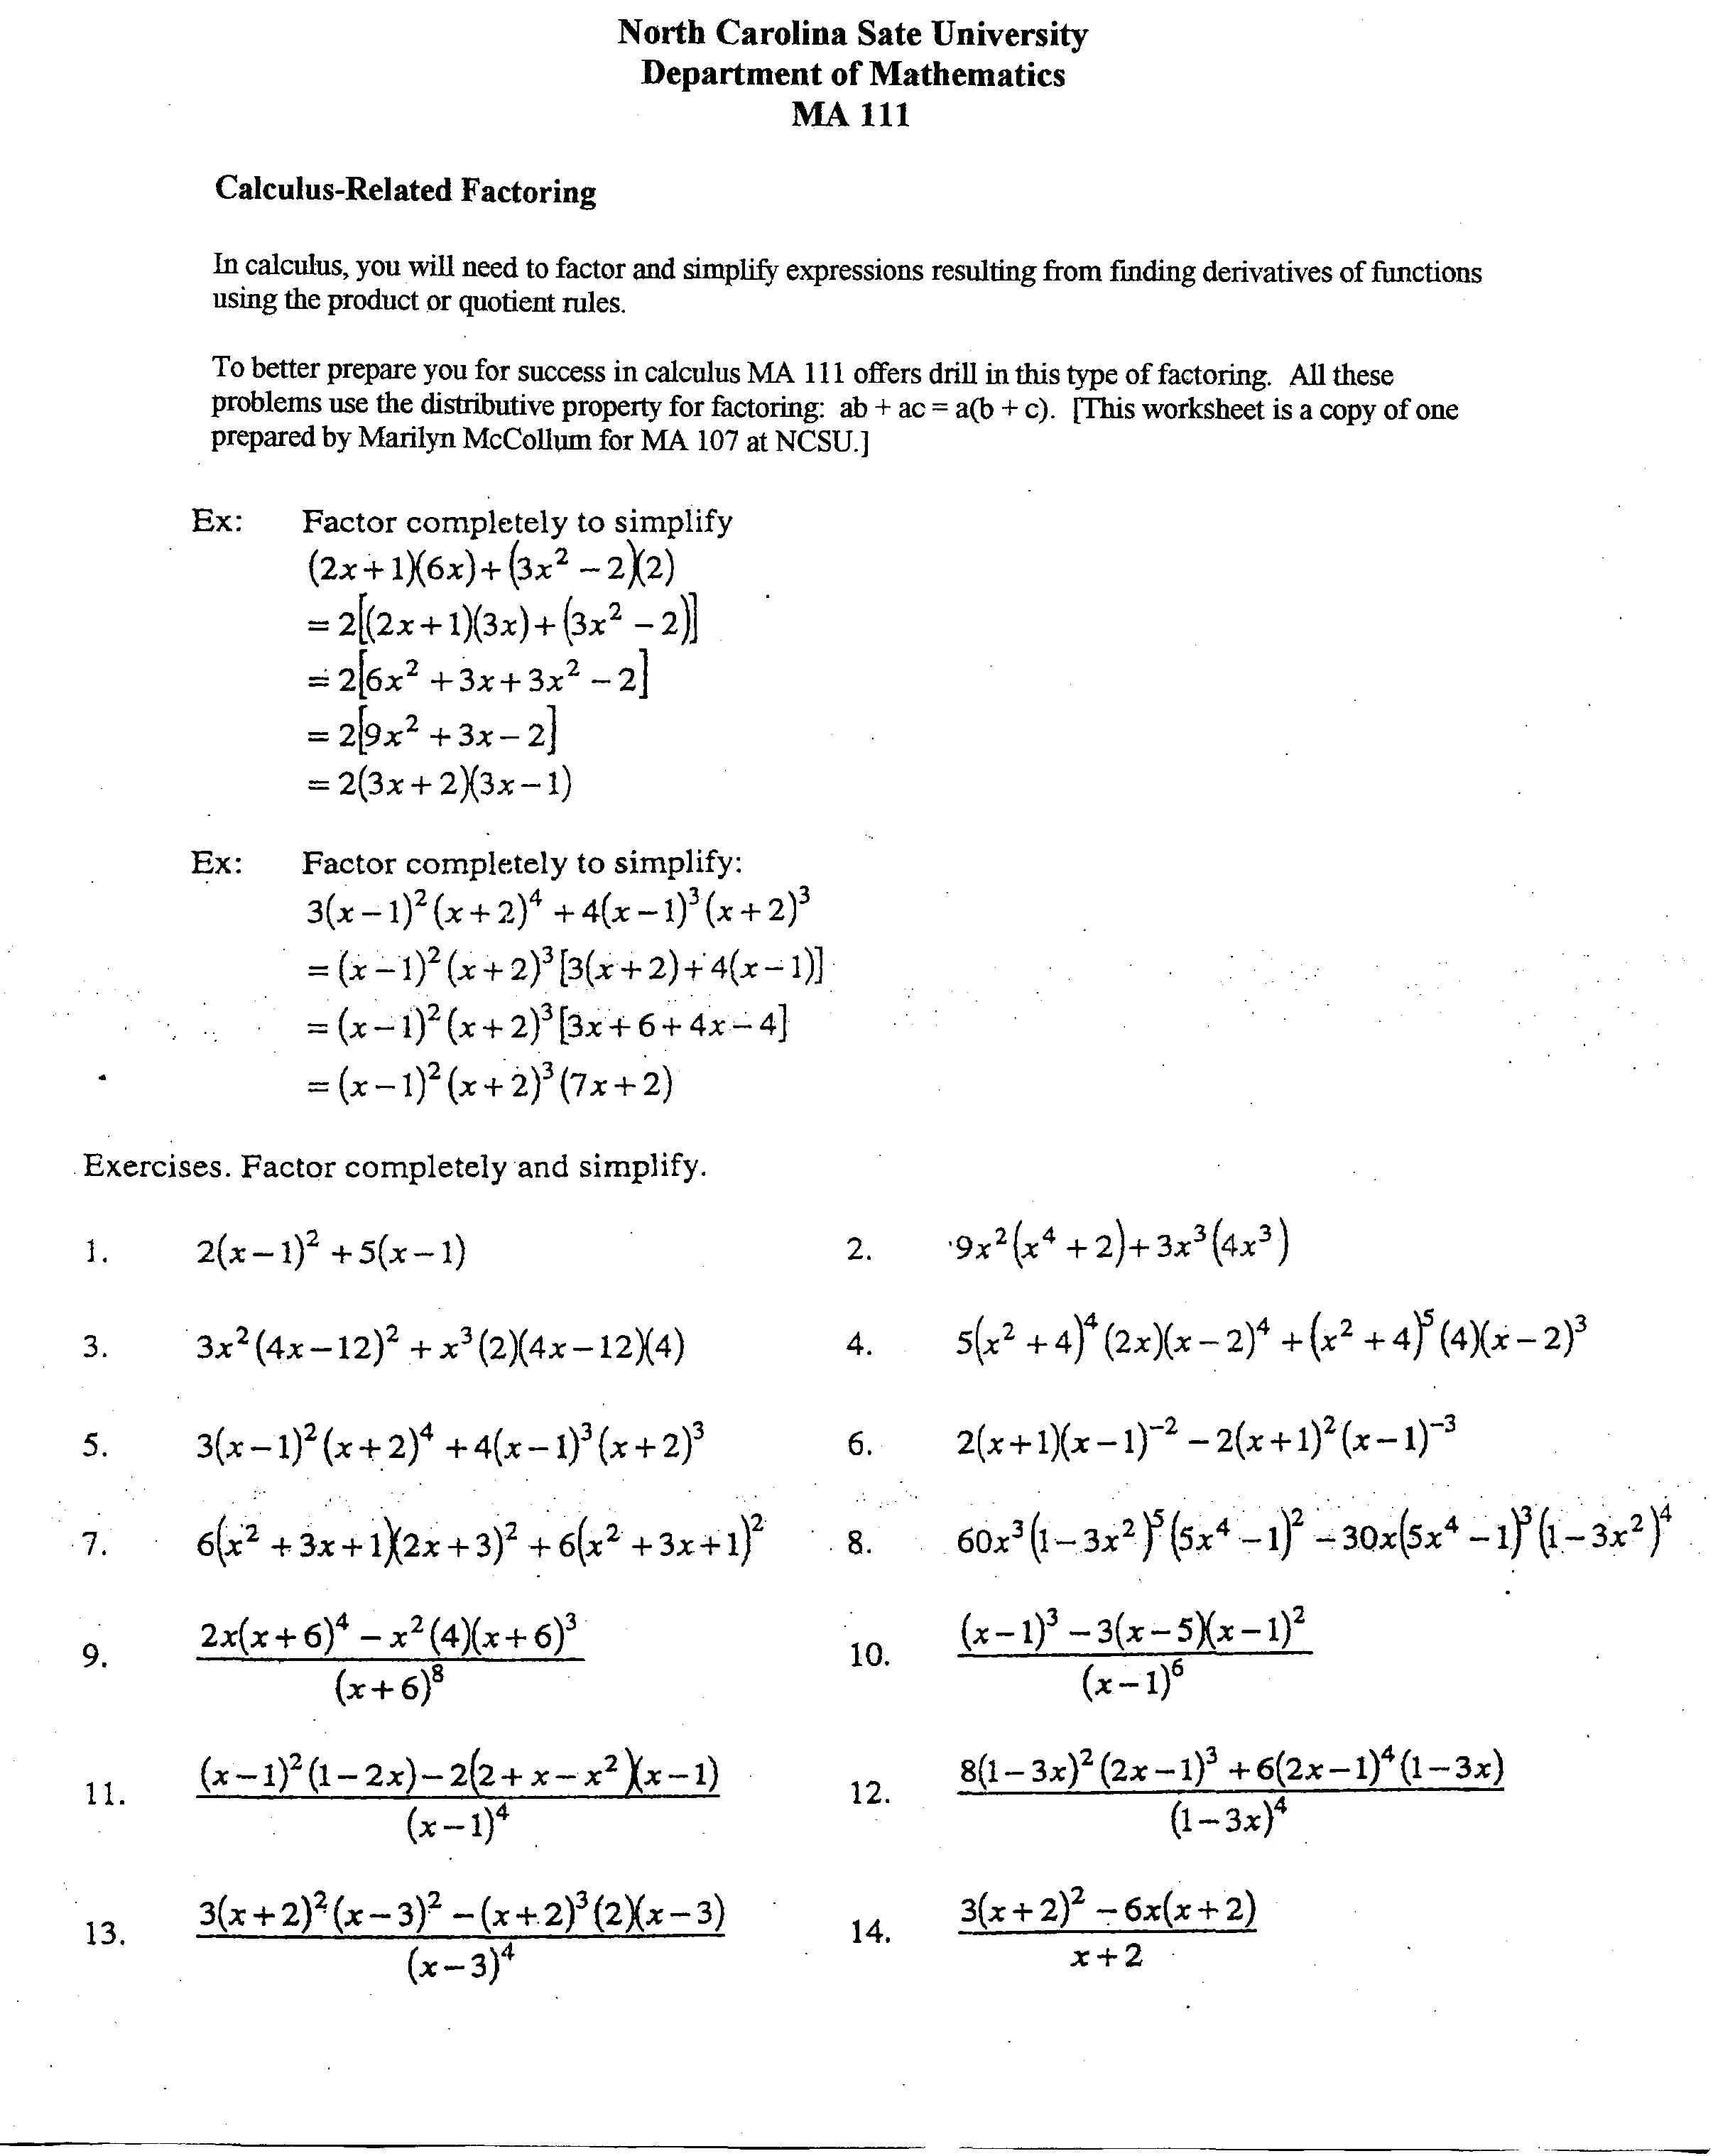 Factoring Using The Distributive Property Worksheet  Yooob As Well As Factoring Distributive Property Worksheet Answers